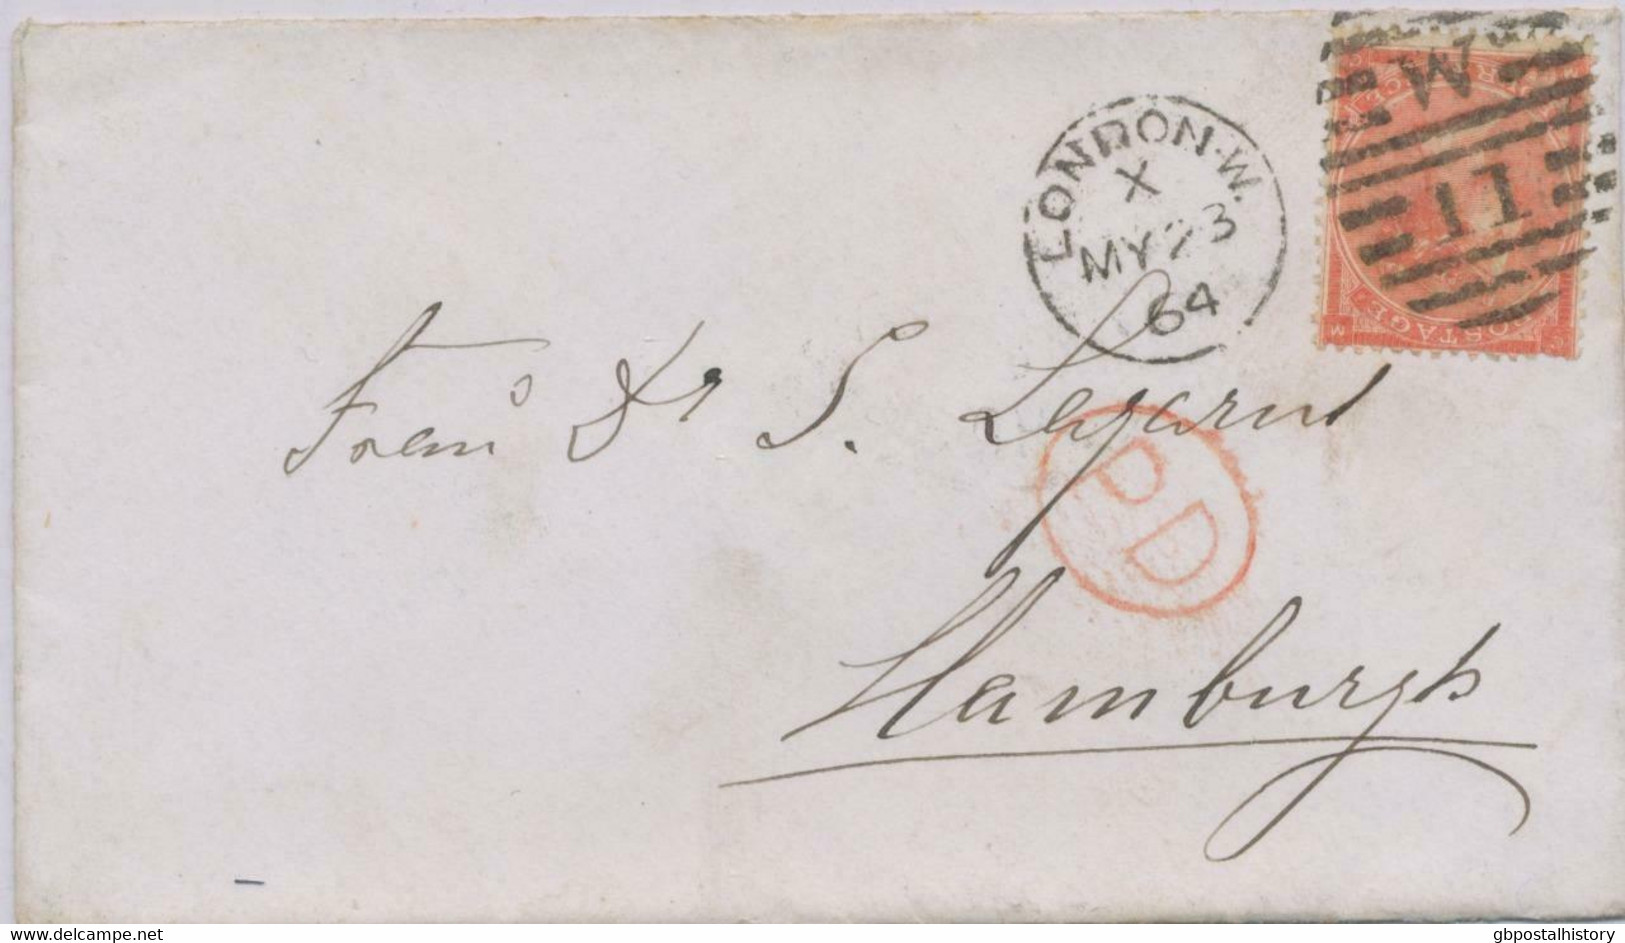 GB 1864 QV 4d Bright Red W Small White Corner Letters Pl.4 With Harlines VARIETY - Errors, Freaks & Oddities (EFOs